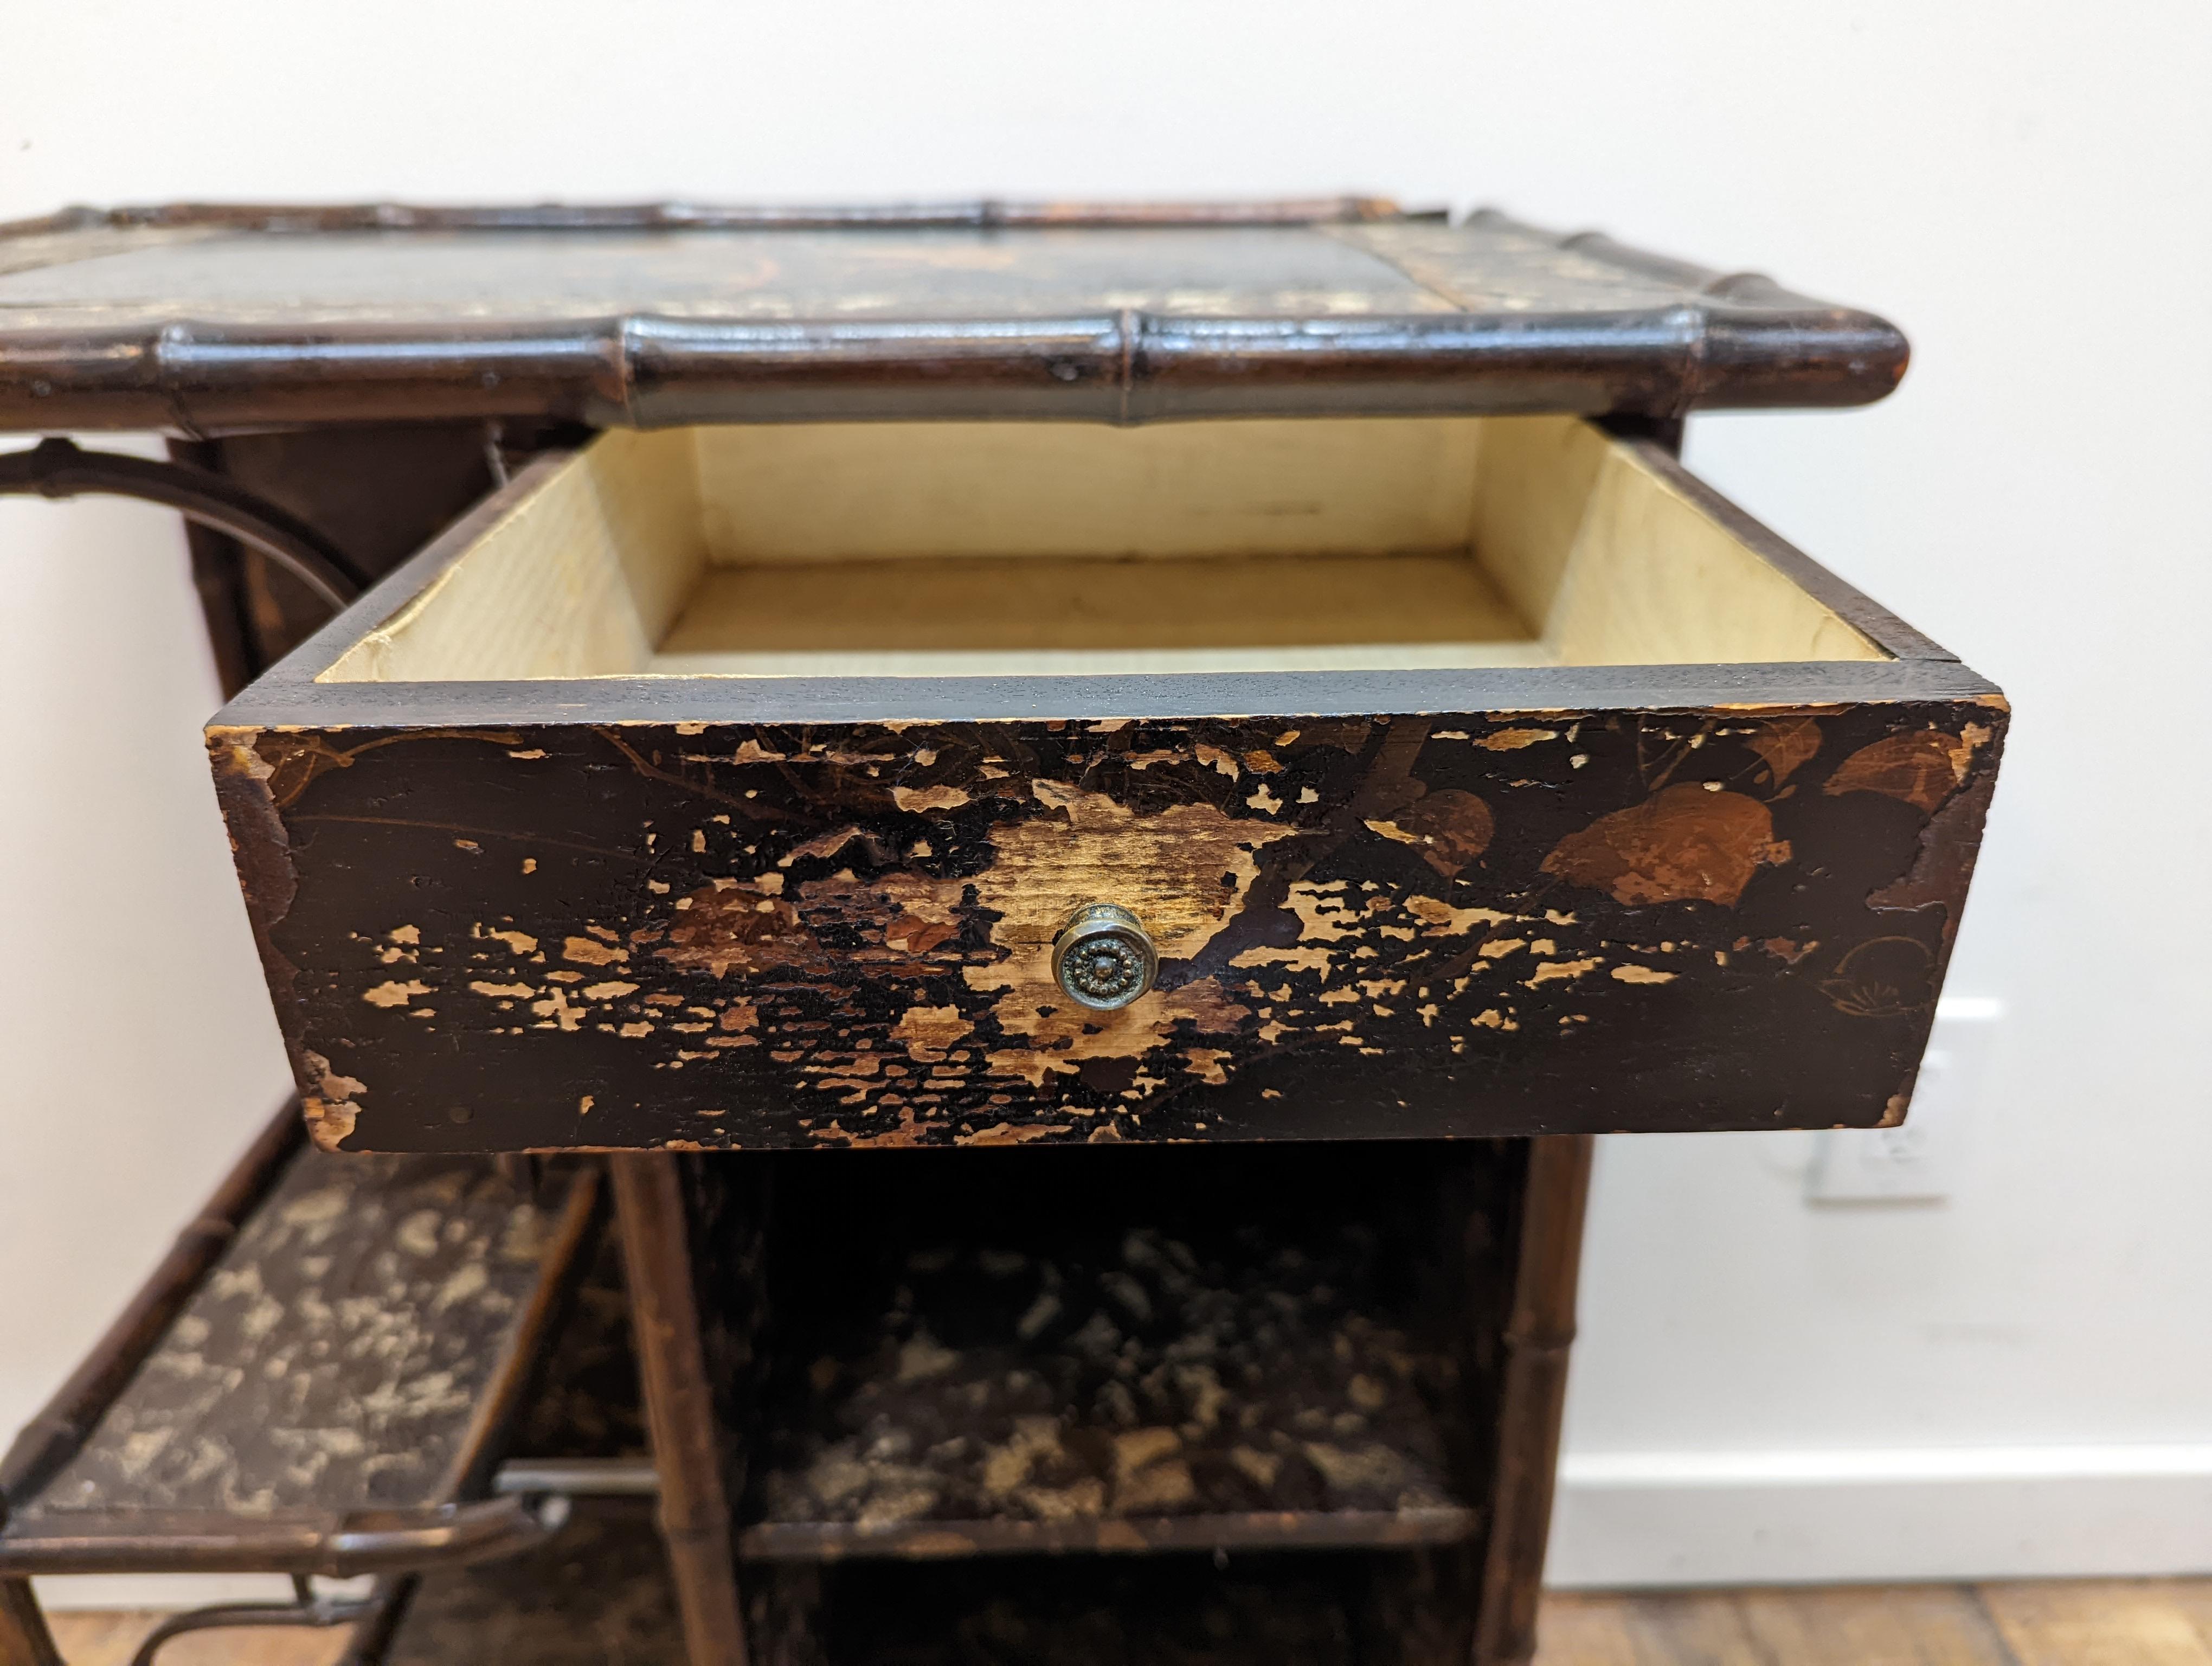 19th Century Bamboo Lacquered Hall Table Shelf For Sale 5